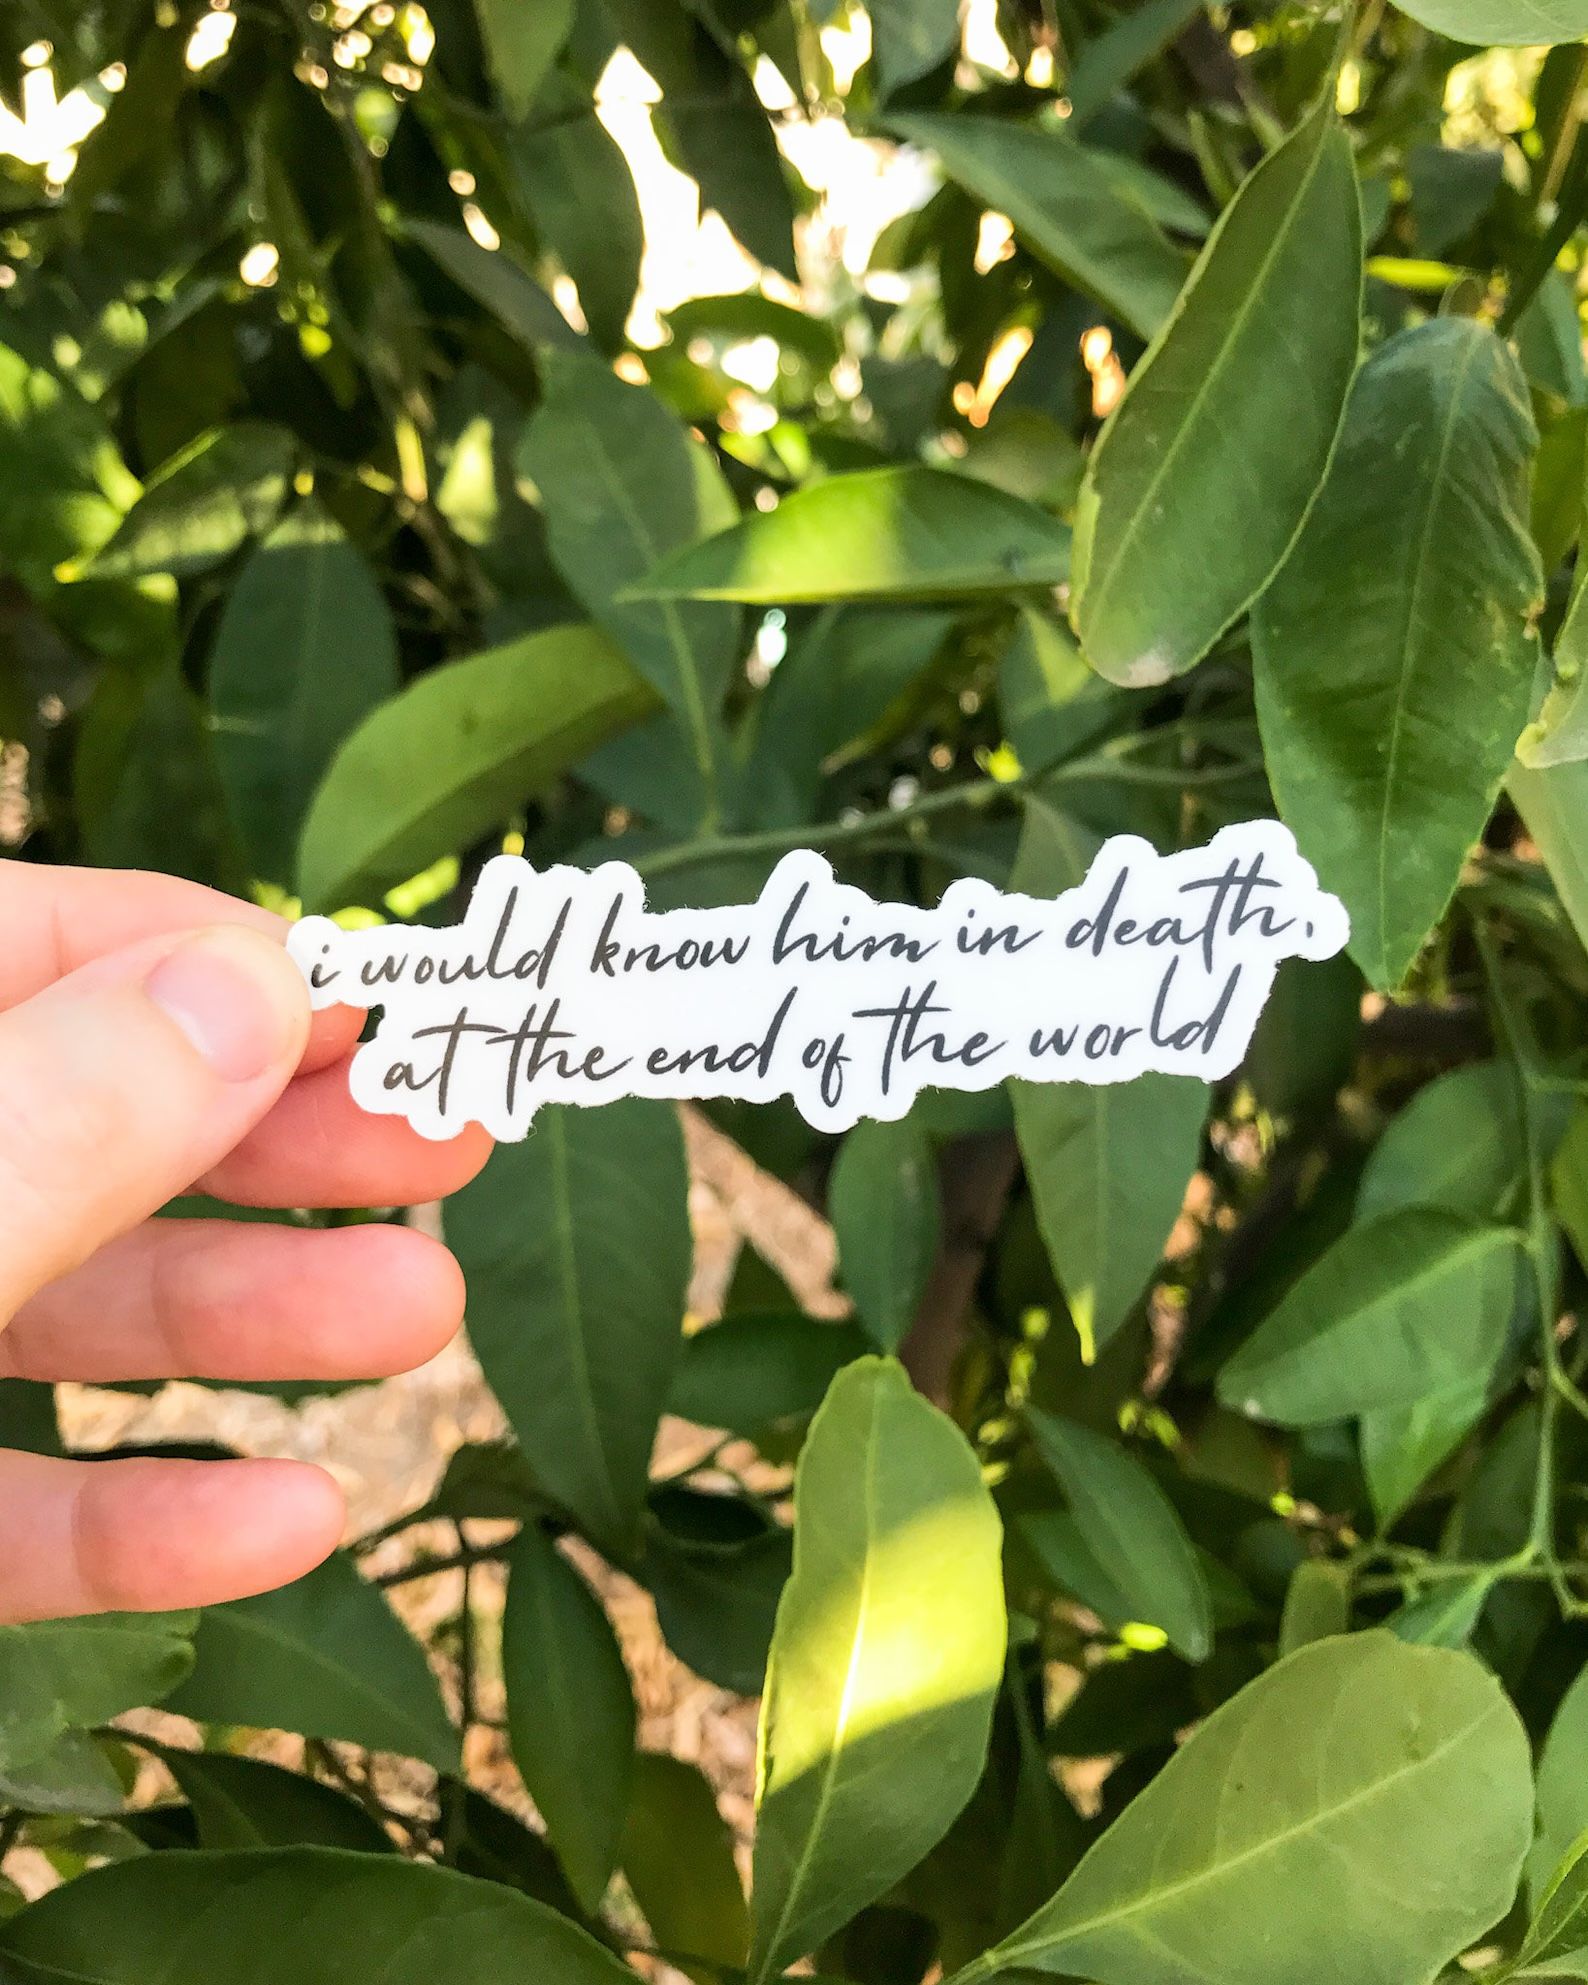 black and white sticker of cursive text reading "I would know him in death, at the end of the world"